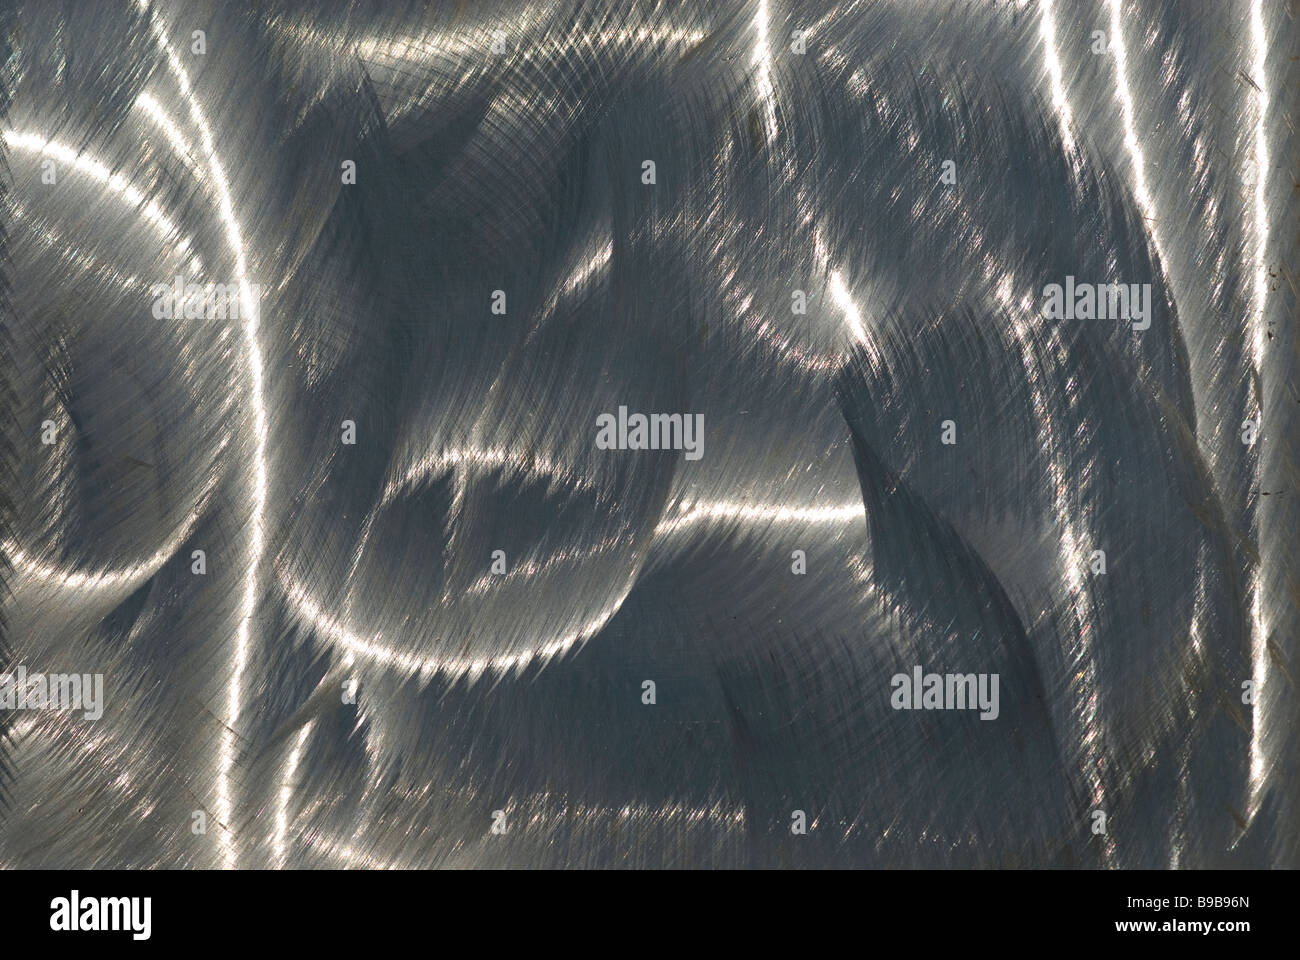 Detail of a stainless steel metal surface Stock Photo